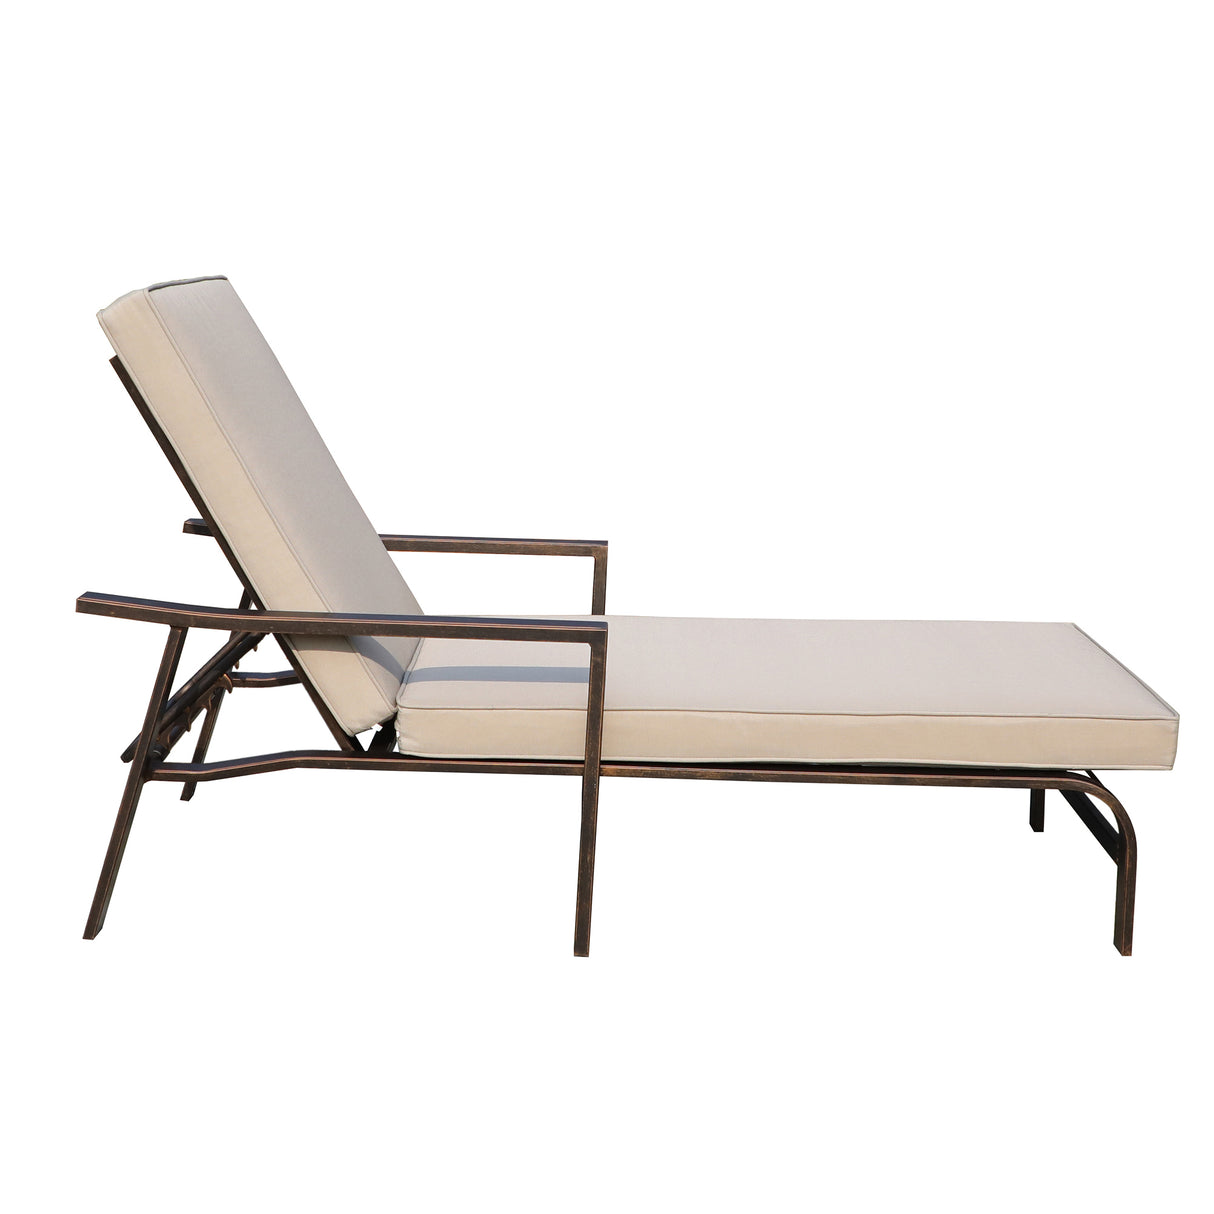 78.93" Long Reclining Chaise Lounge Set with Taupe Cushions, Liberty Bronze